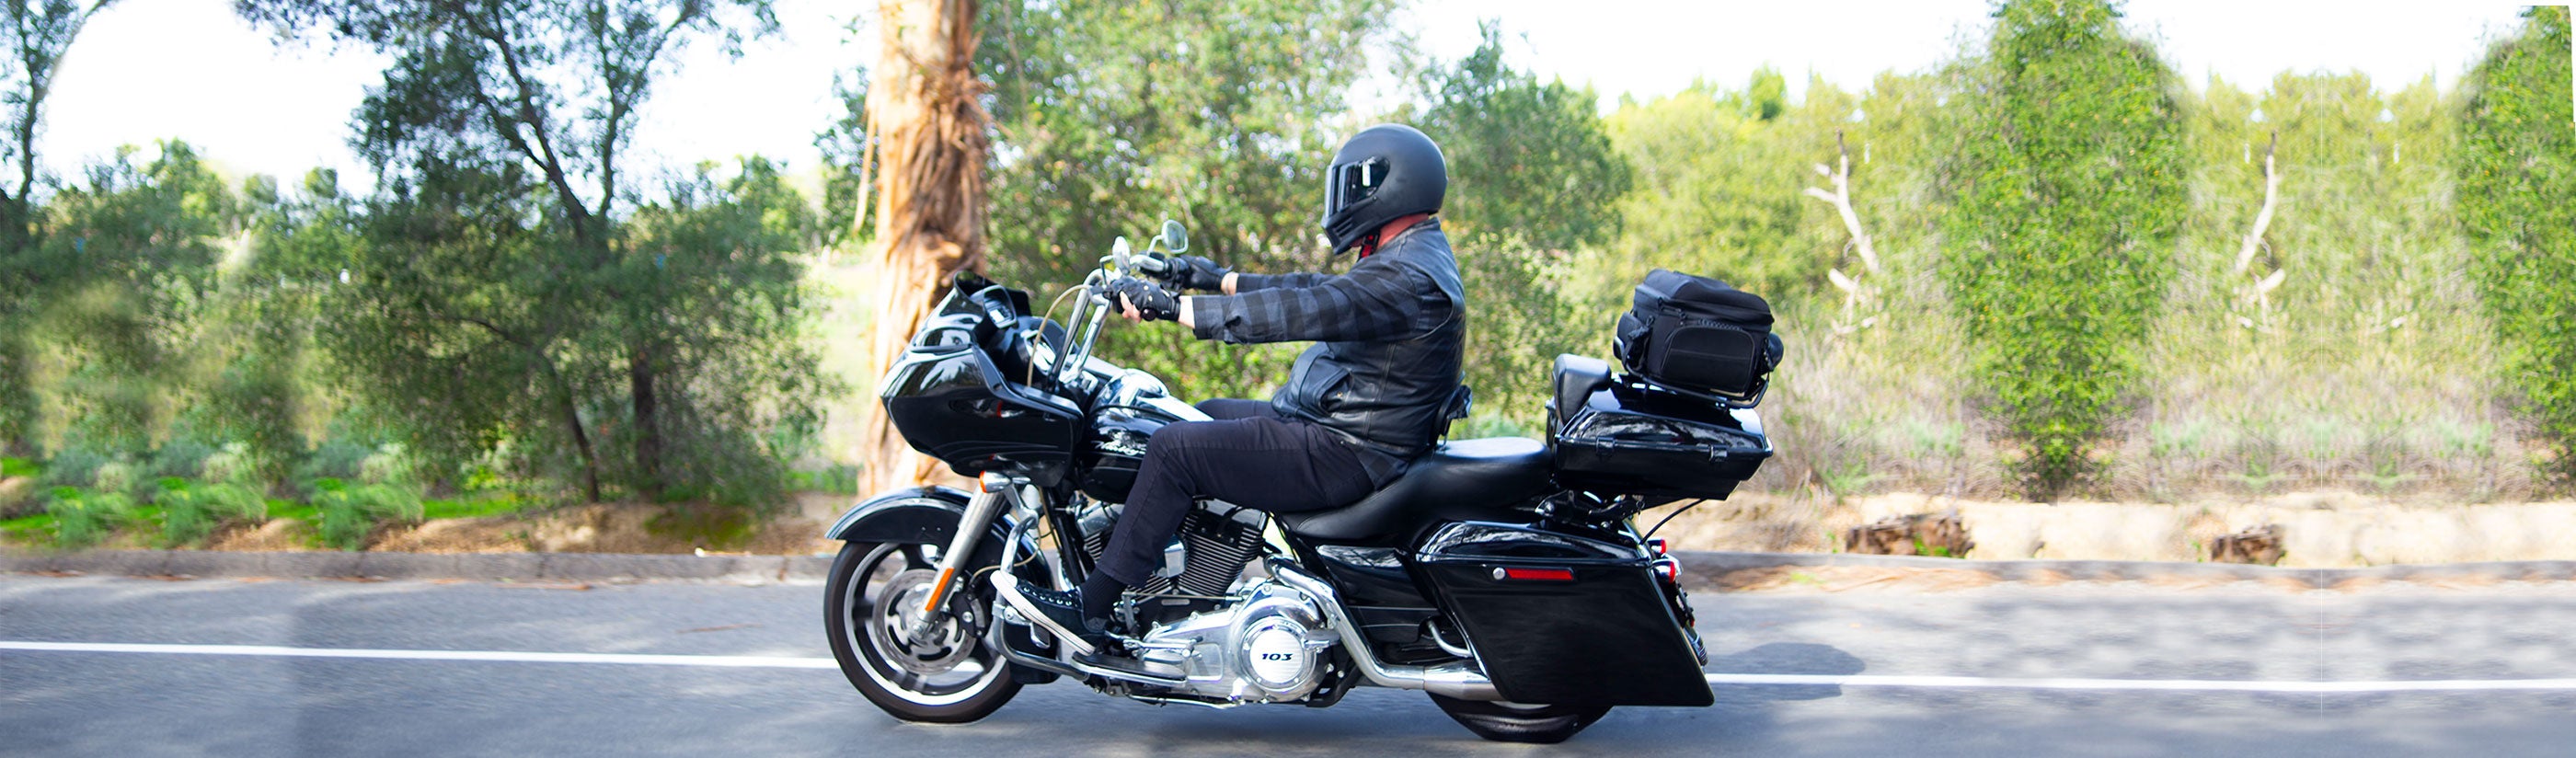 Harley Touring Electra Glide FLHTC/I 2014+ All Motorcycle Luggage Bags, Parts & Accessories By Bike